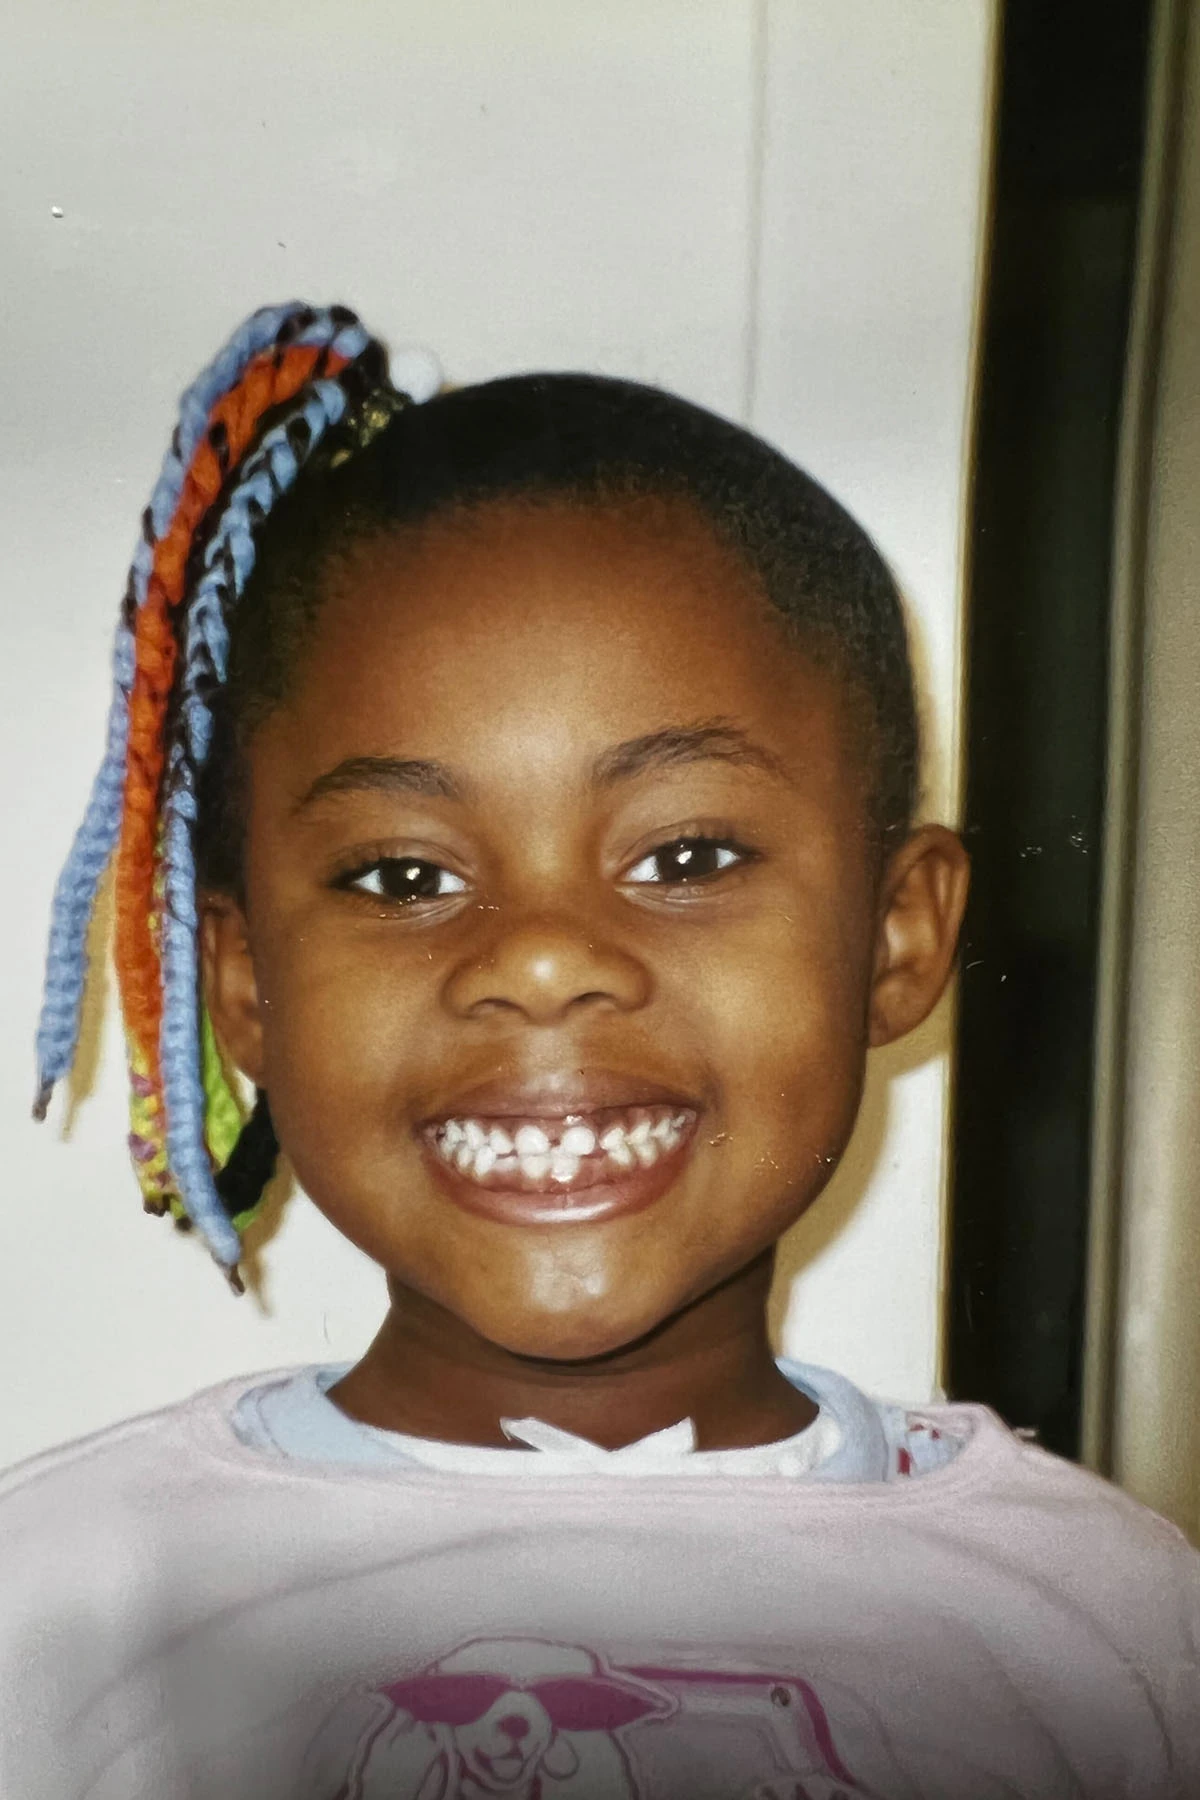 A 7-year-old Bria Hubert smiles as she shows off her hairstyle for "crazy hair day" at school.